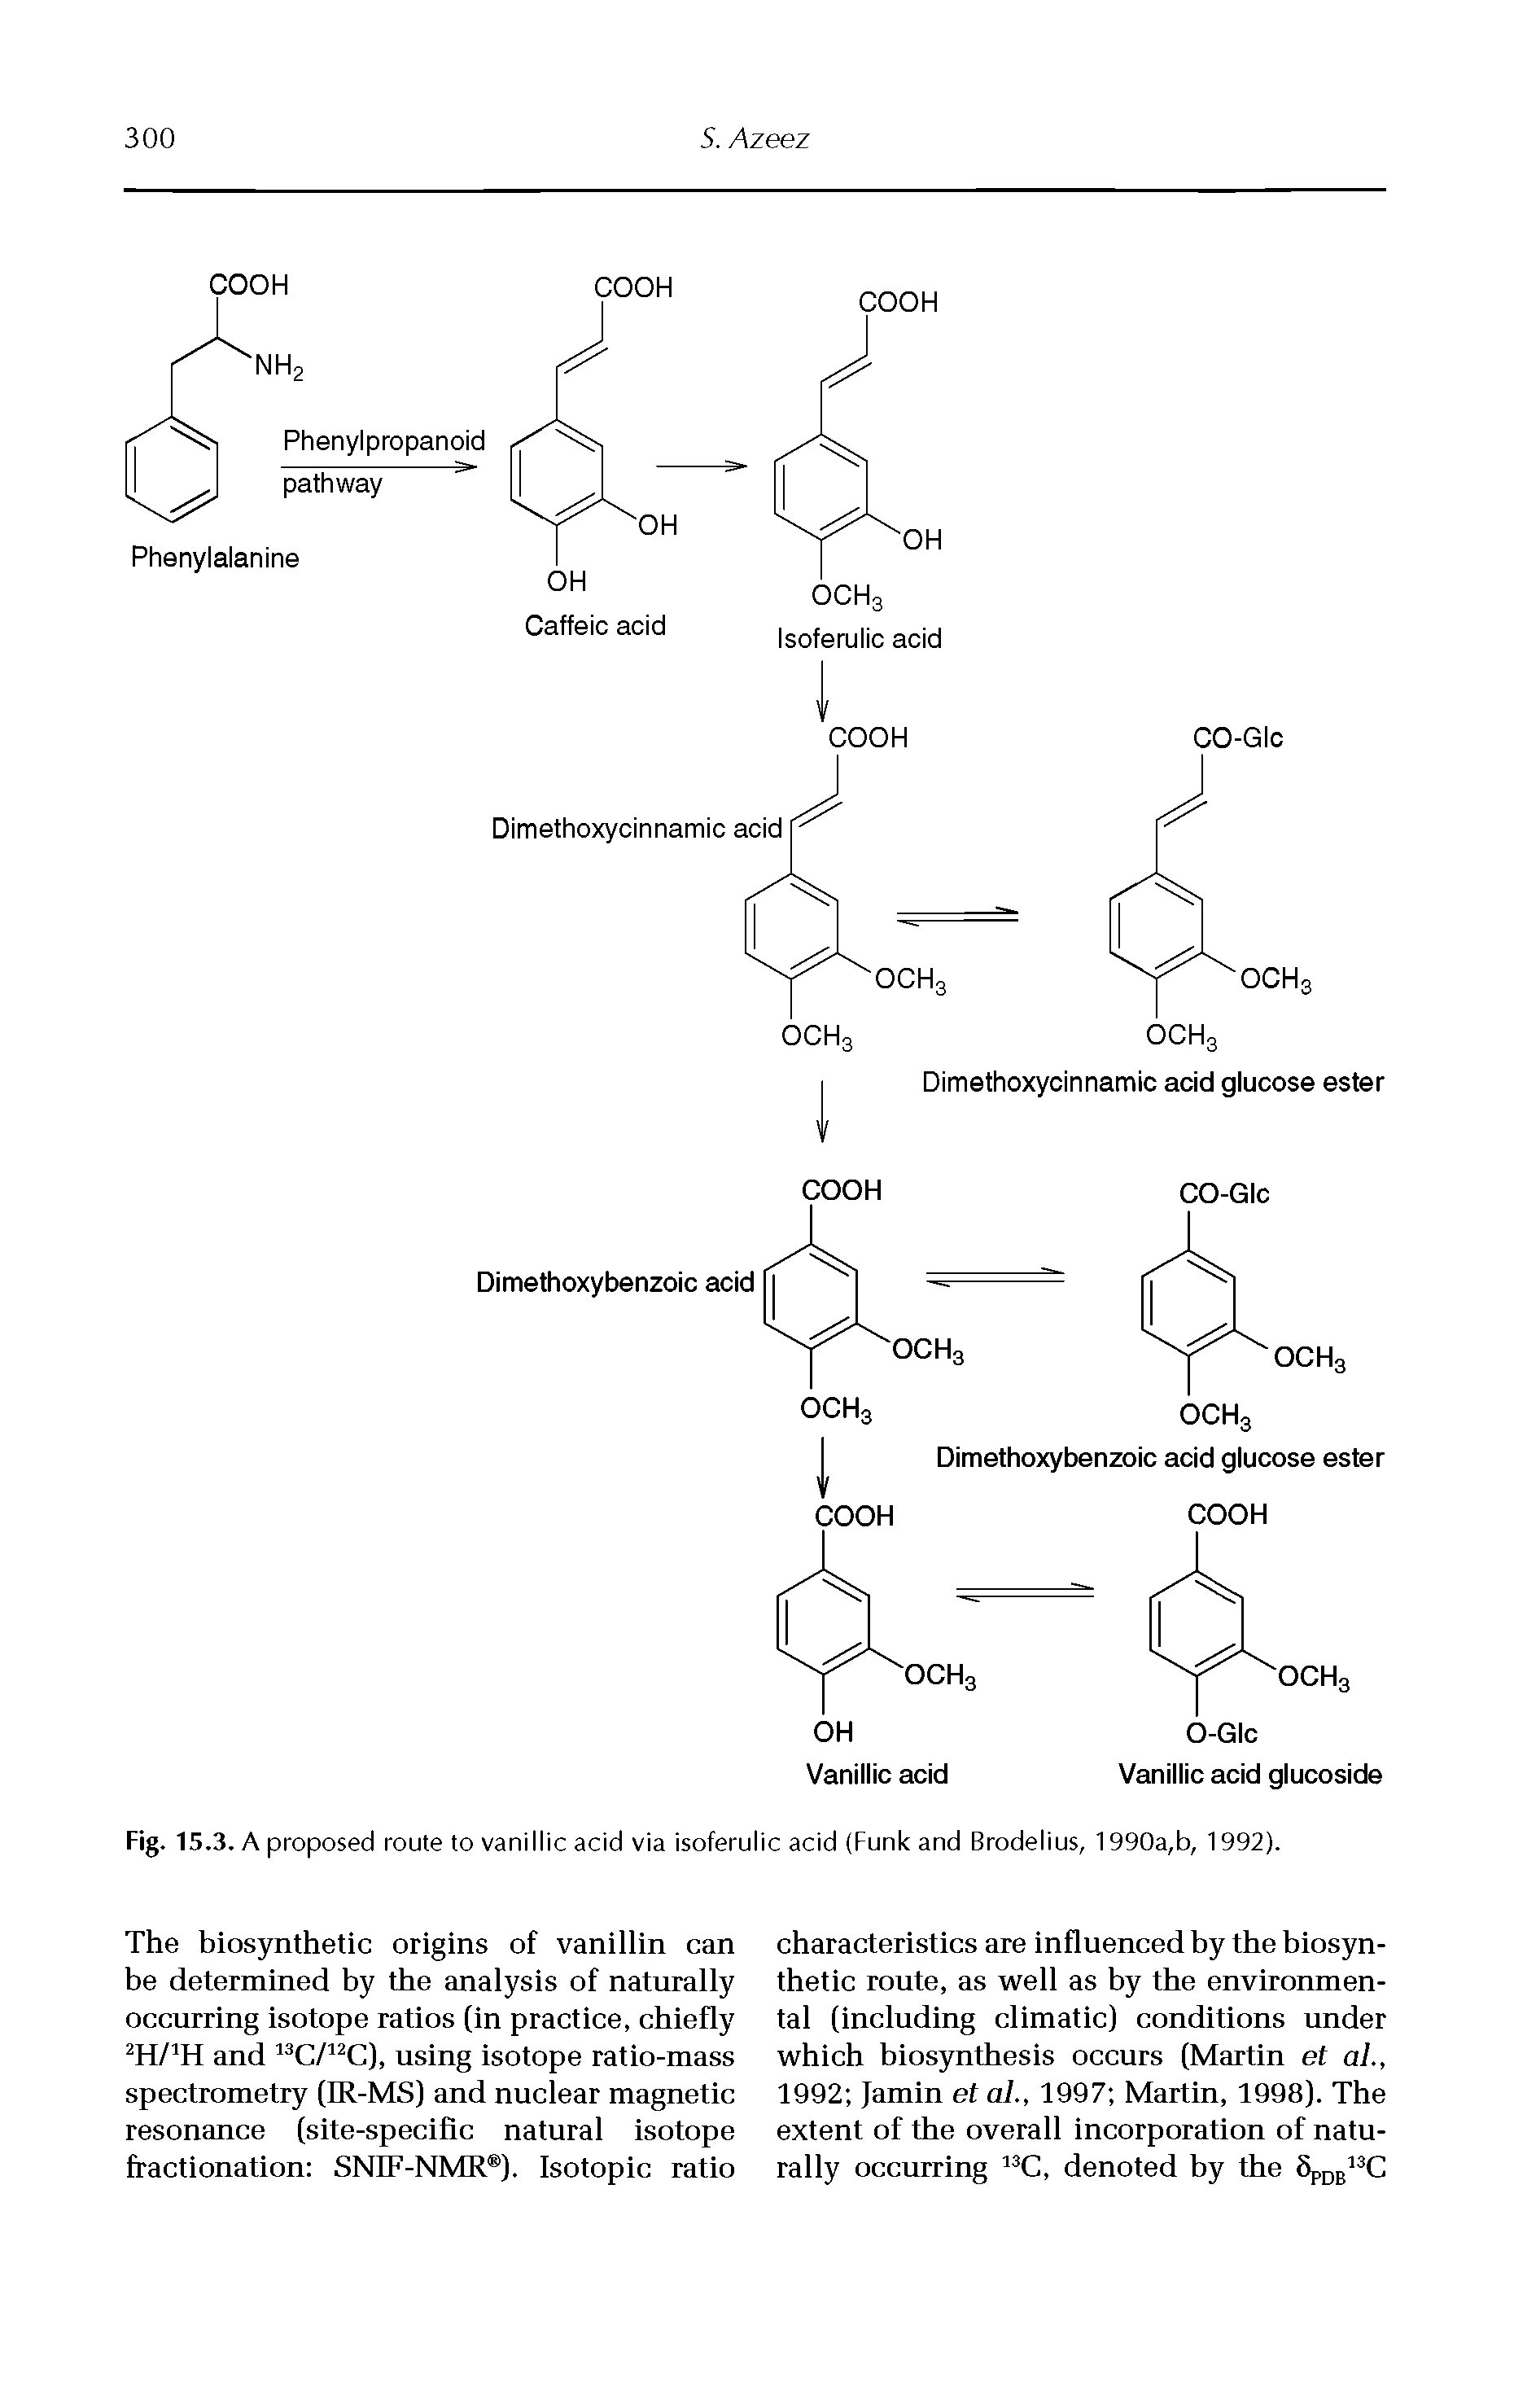 Fig. 15.3. A proposed route to vanillic acid via isoferulic acid (Funk and Brodelius, 1990a,b, 1992).